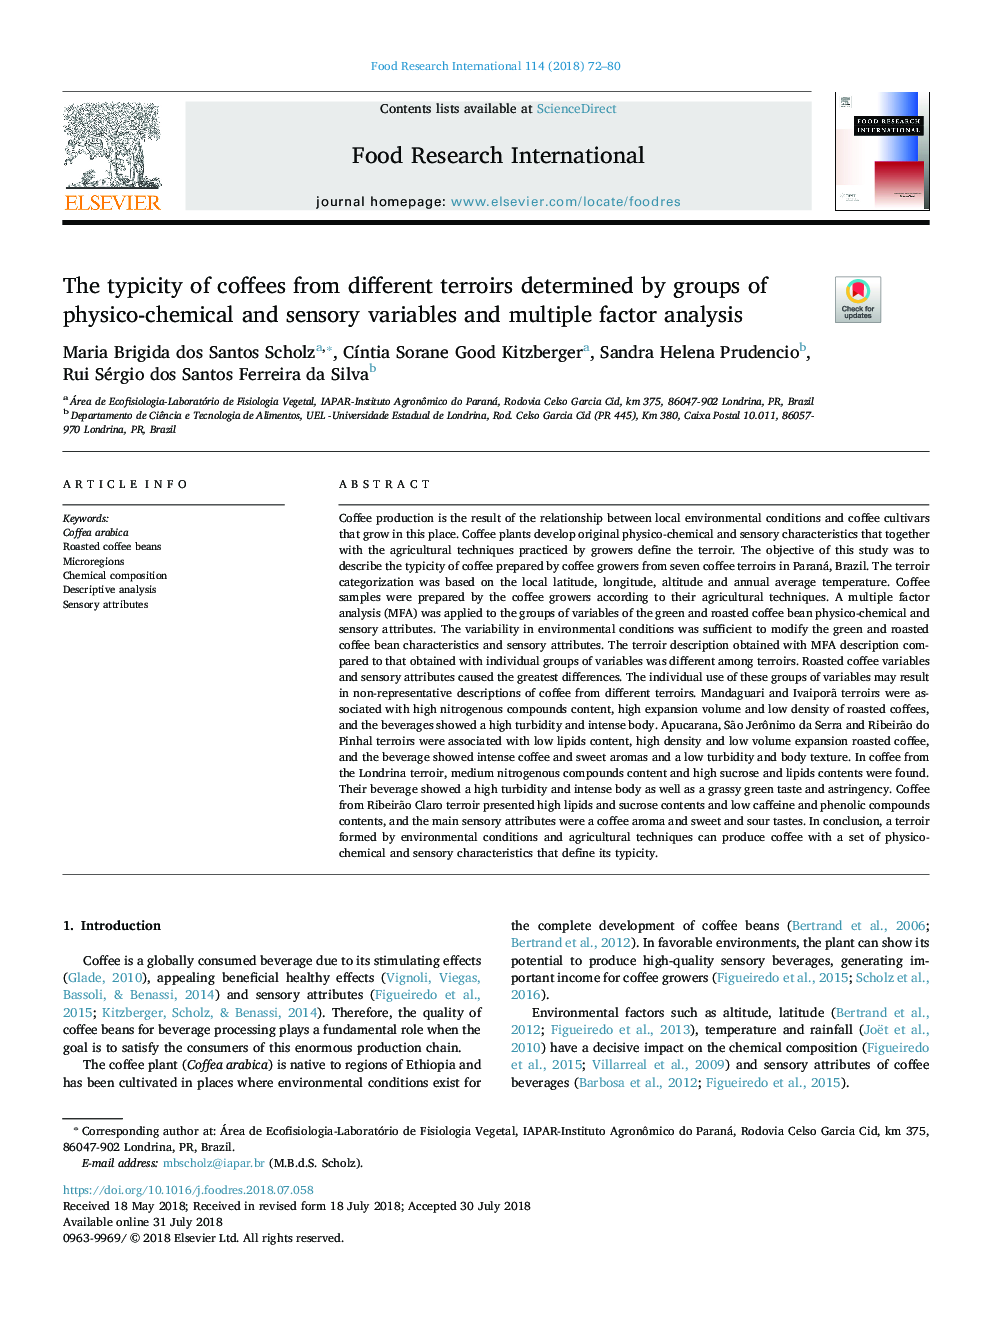 The typicity of coffees from different terroirs determined by groups of physico-chemical and sensory variables and multiple factor analysis